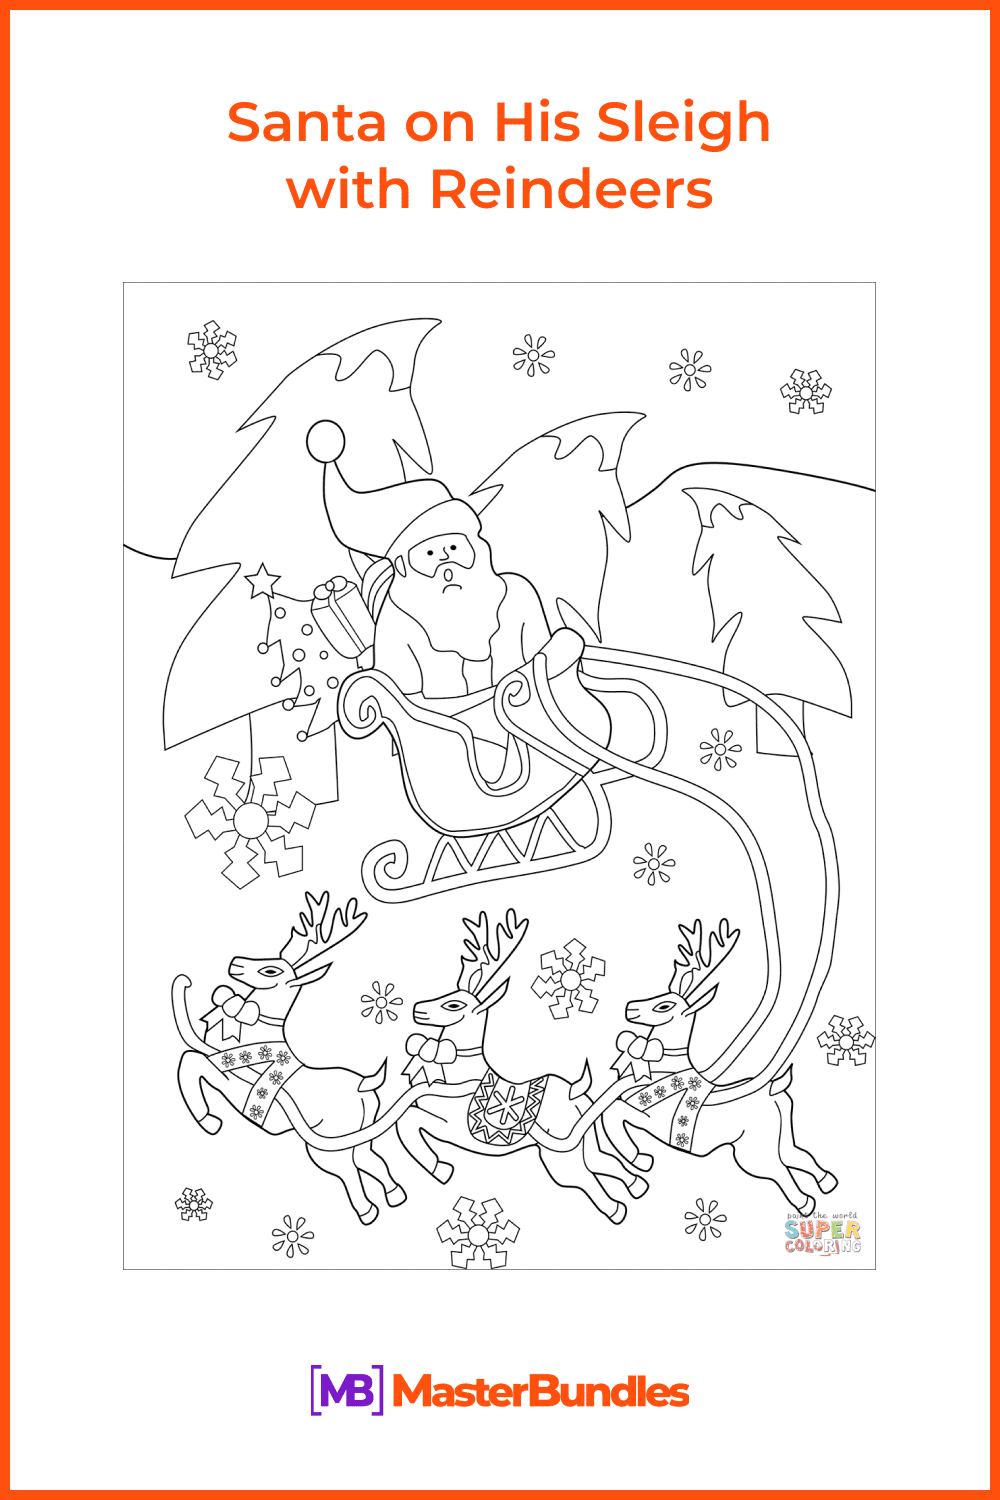 Santa on His Sleigh with Reindeers coloring page pinterest image.